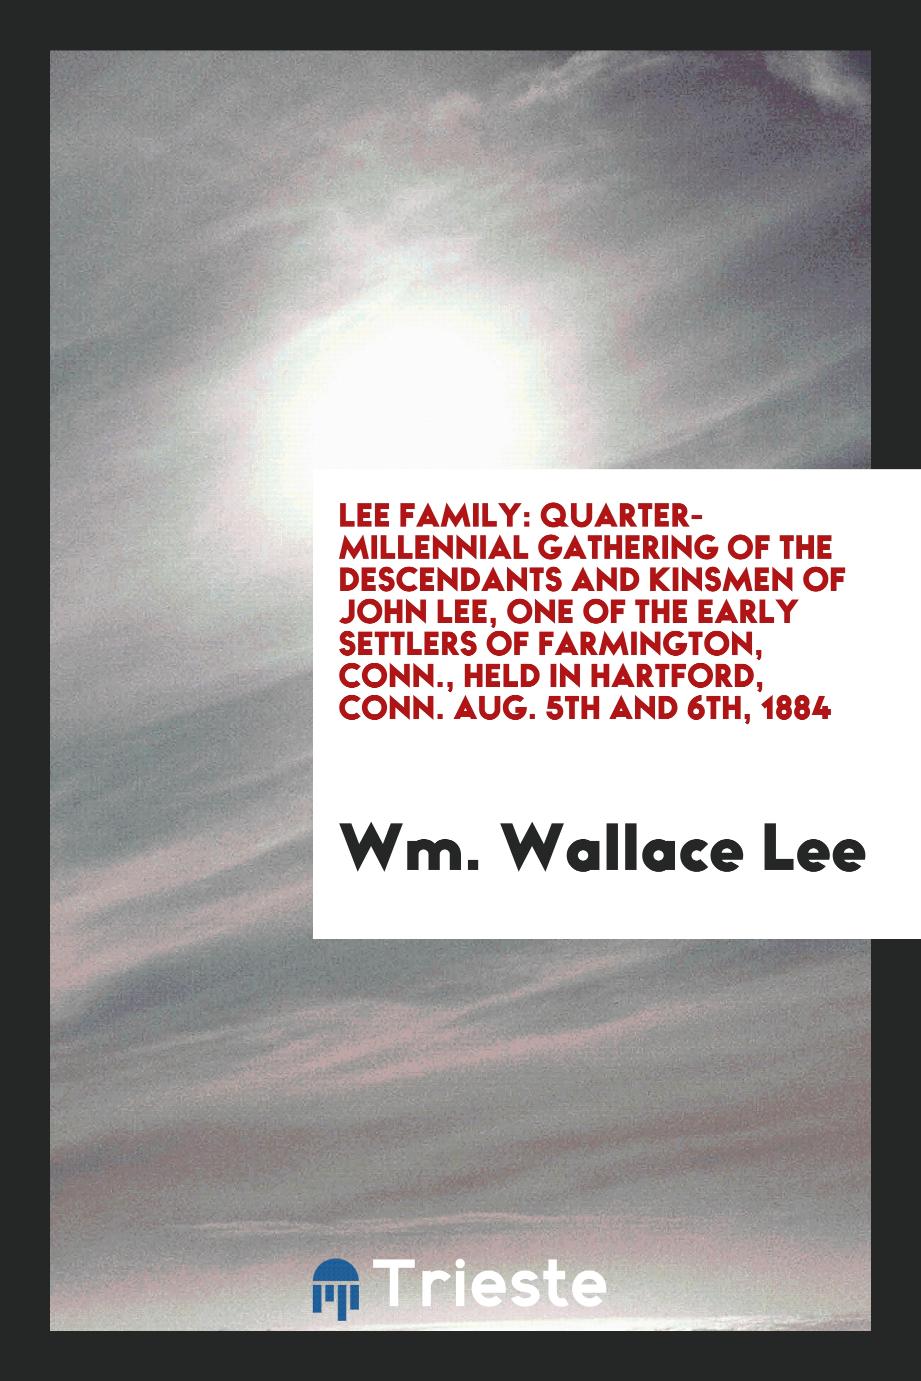 Lee Family: Quarter-Millennial Gathering of the Descendants and Kinsmen of John Lee, One of the Early Settlers of Farmington, Conn., Held in Hartford, Conn. Aug. 5th and 6th, 1884